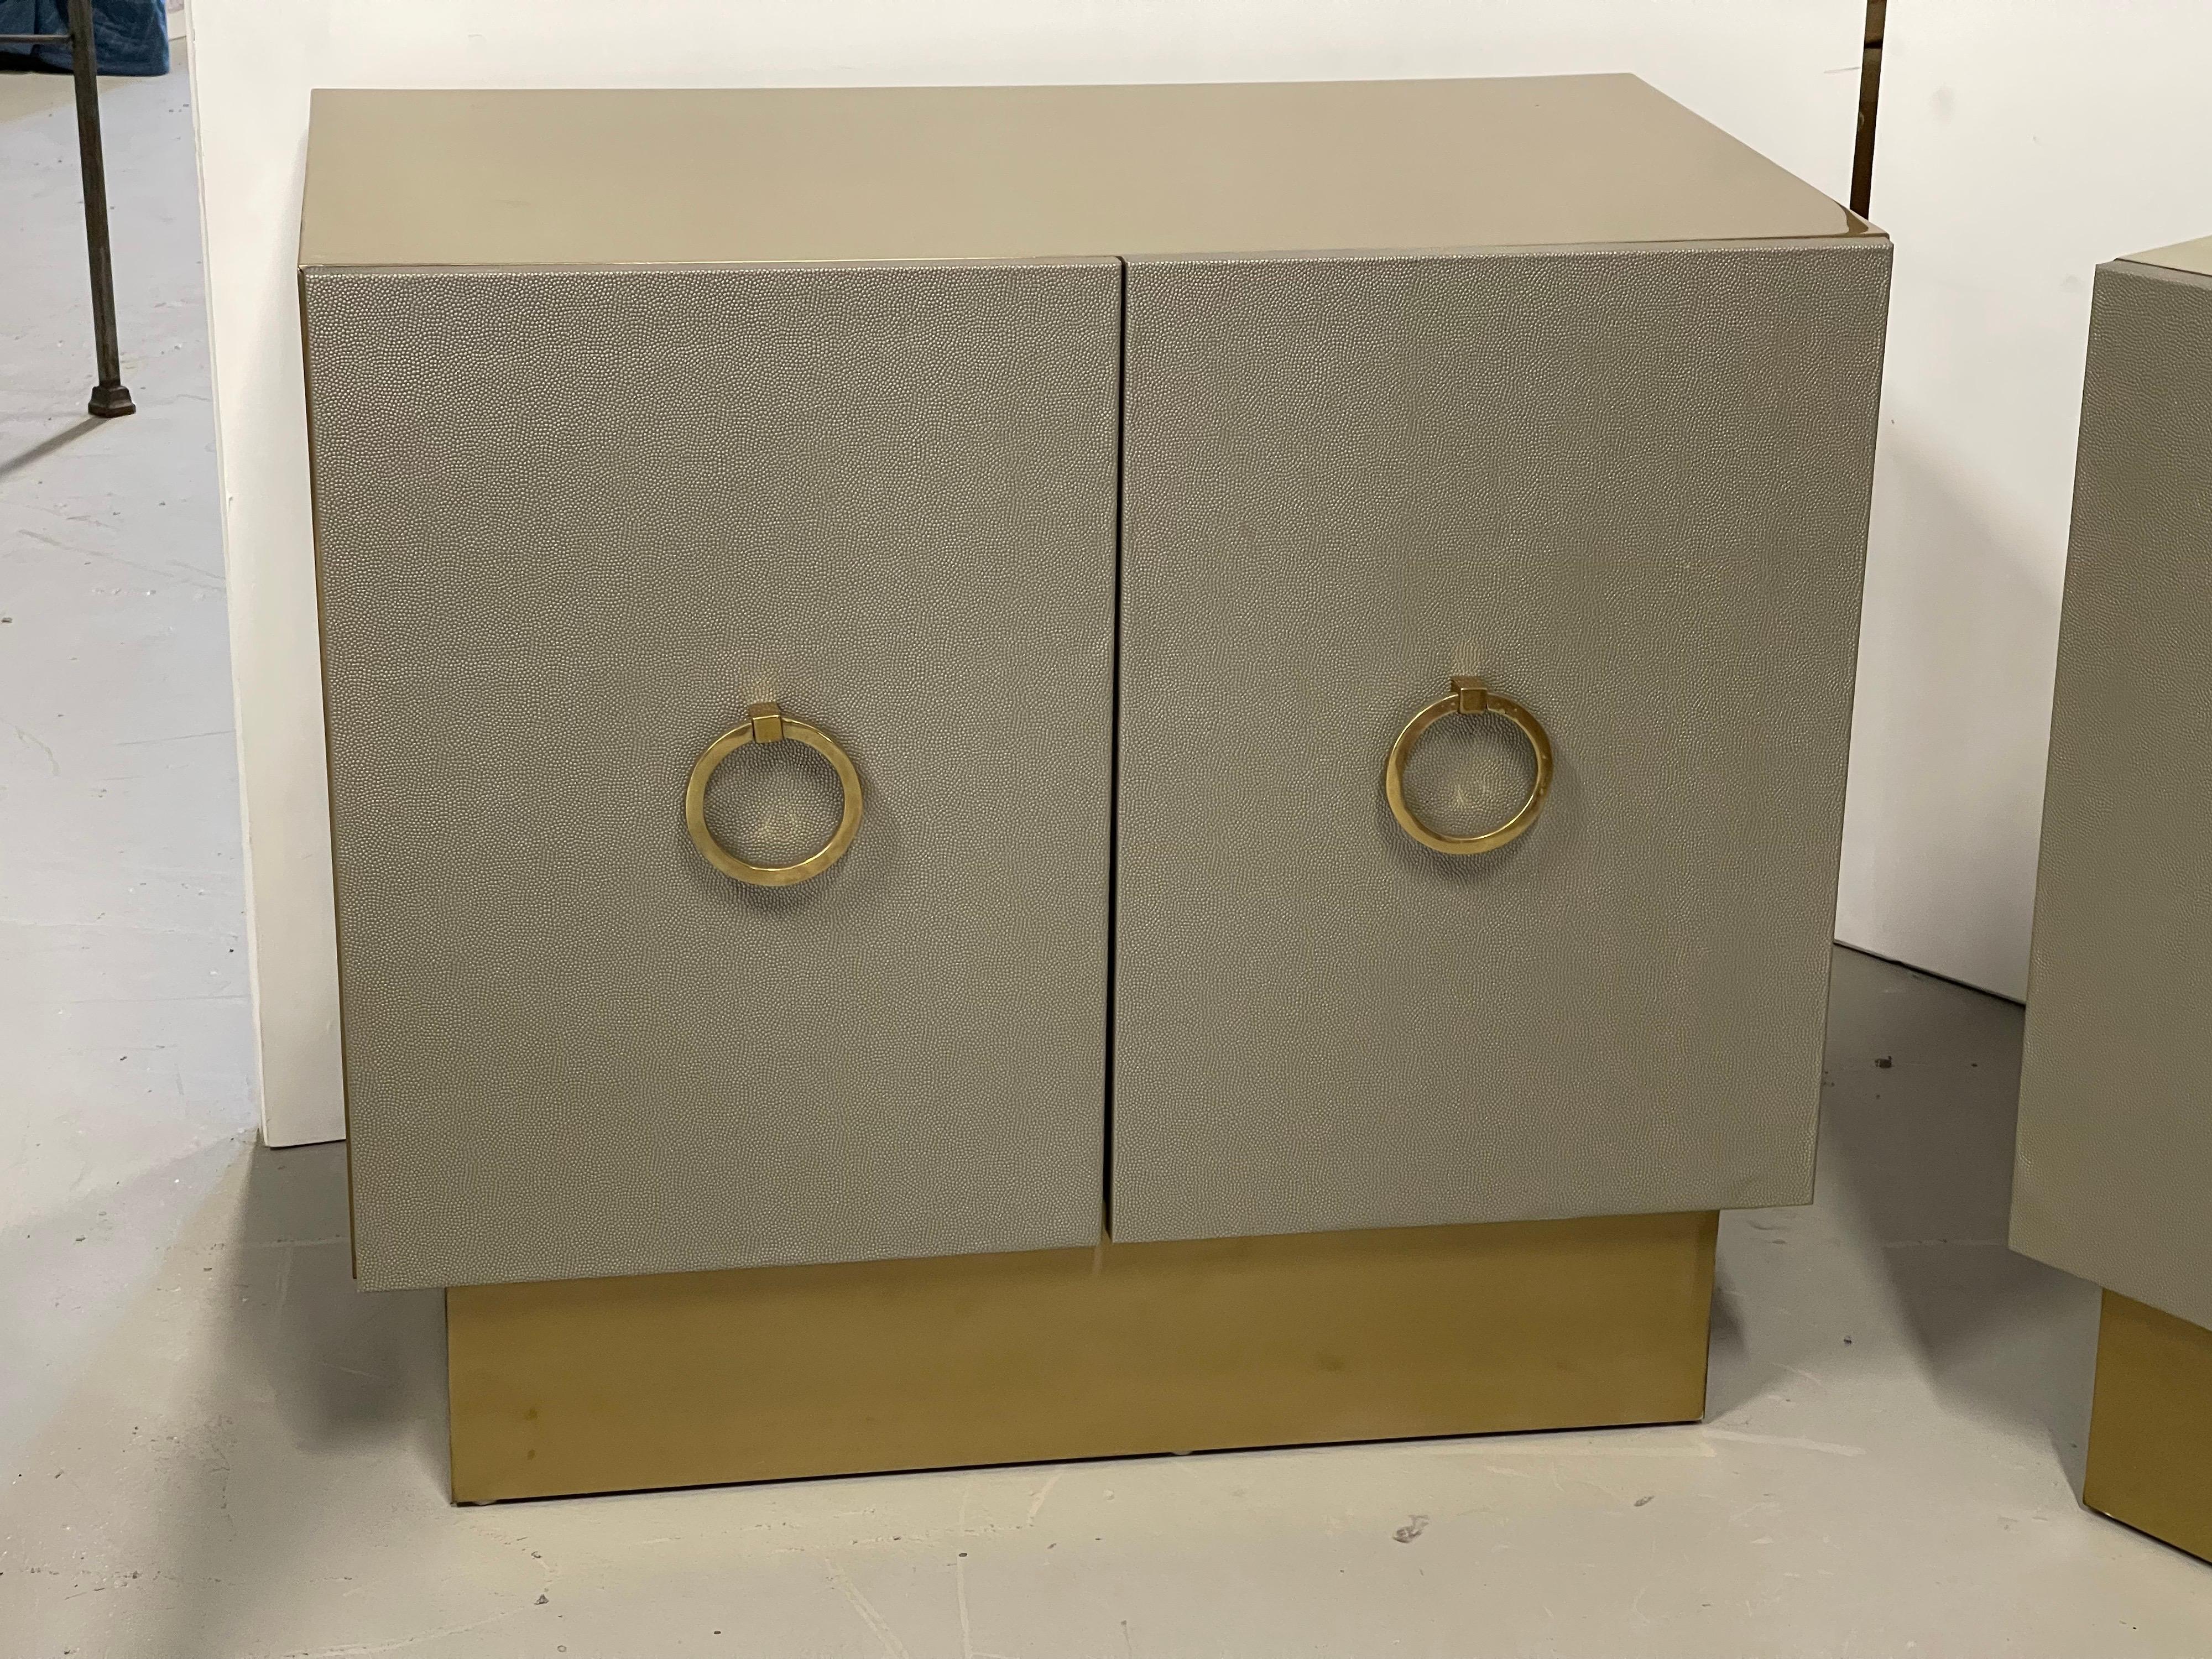 A pretty pair of custom Bridges over time custom night stands Made by a local Palm Springs artisan Marco Antonio. The front doors are wrapped in leather. The bodies have a metallic brass finish. Finish interiors are painted grey. One shelf in each.